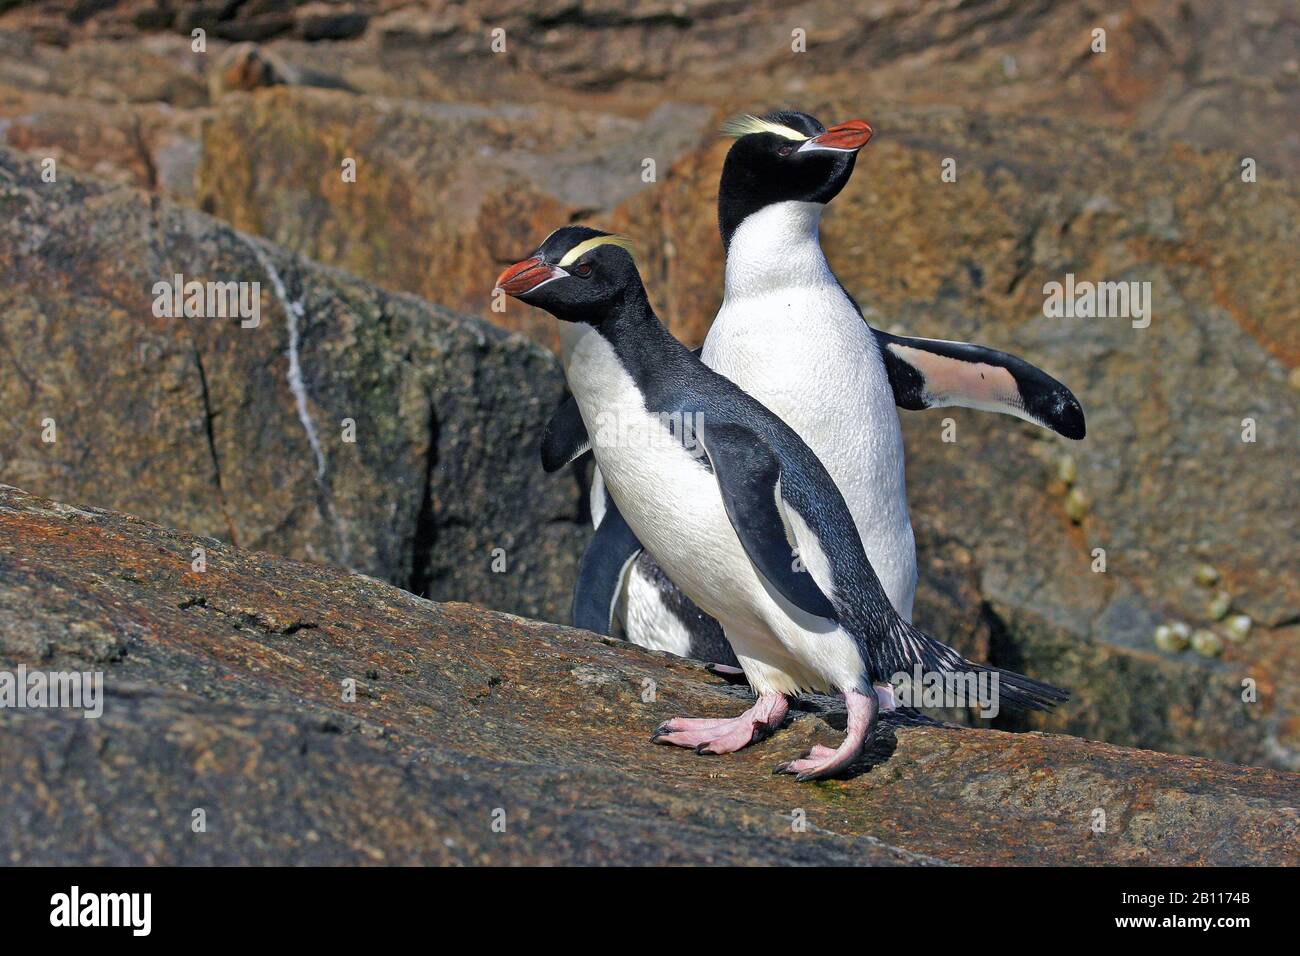 big-crested penguin (Eudyptes sclateri), two big-crested penguins, New Zealand Stock Photo